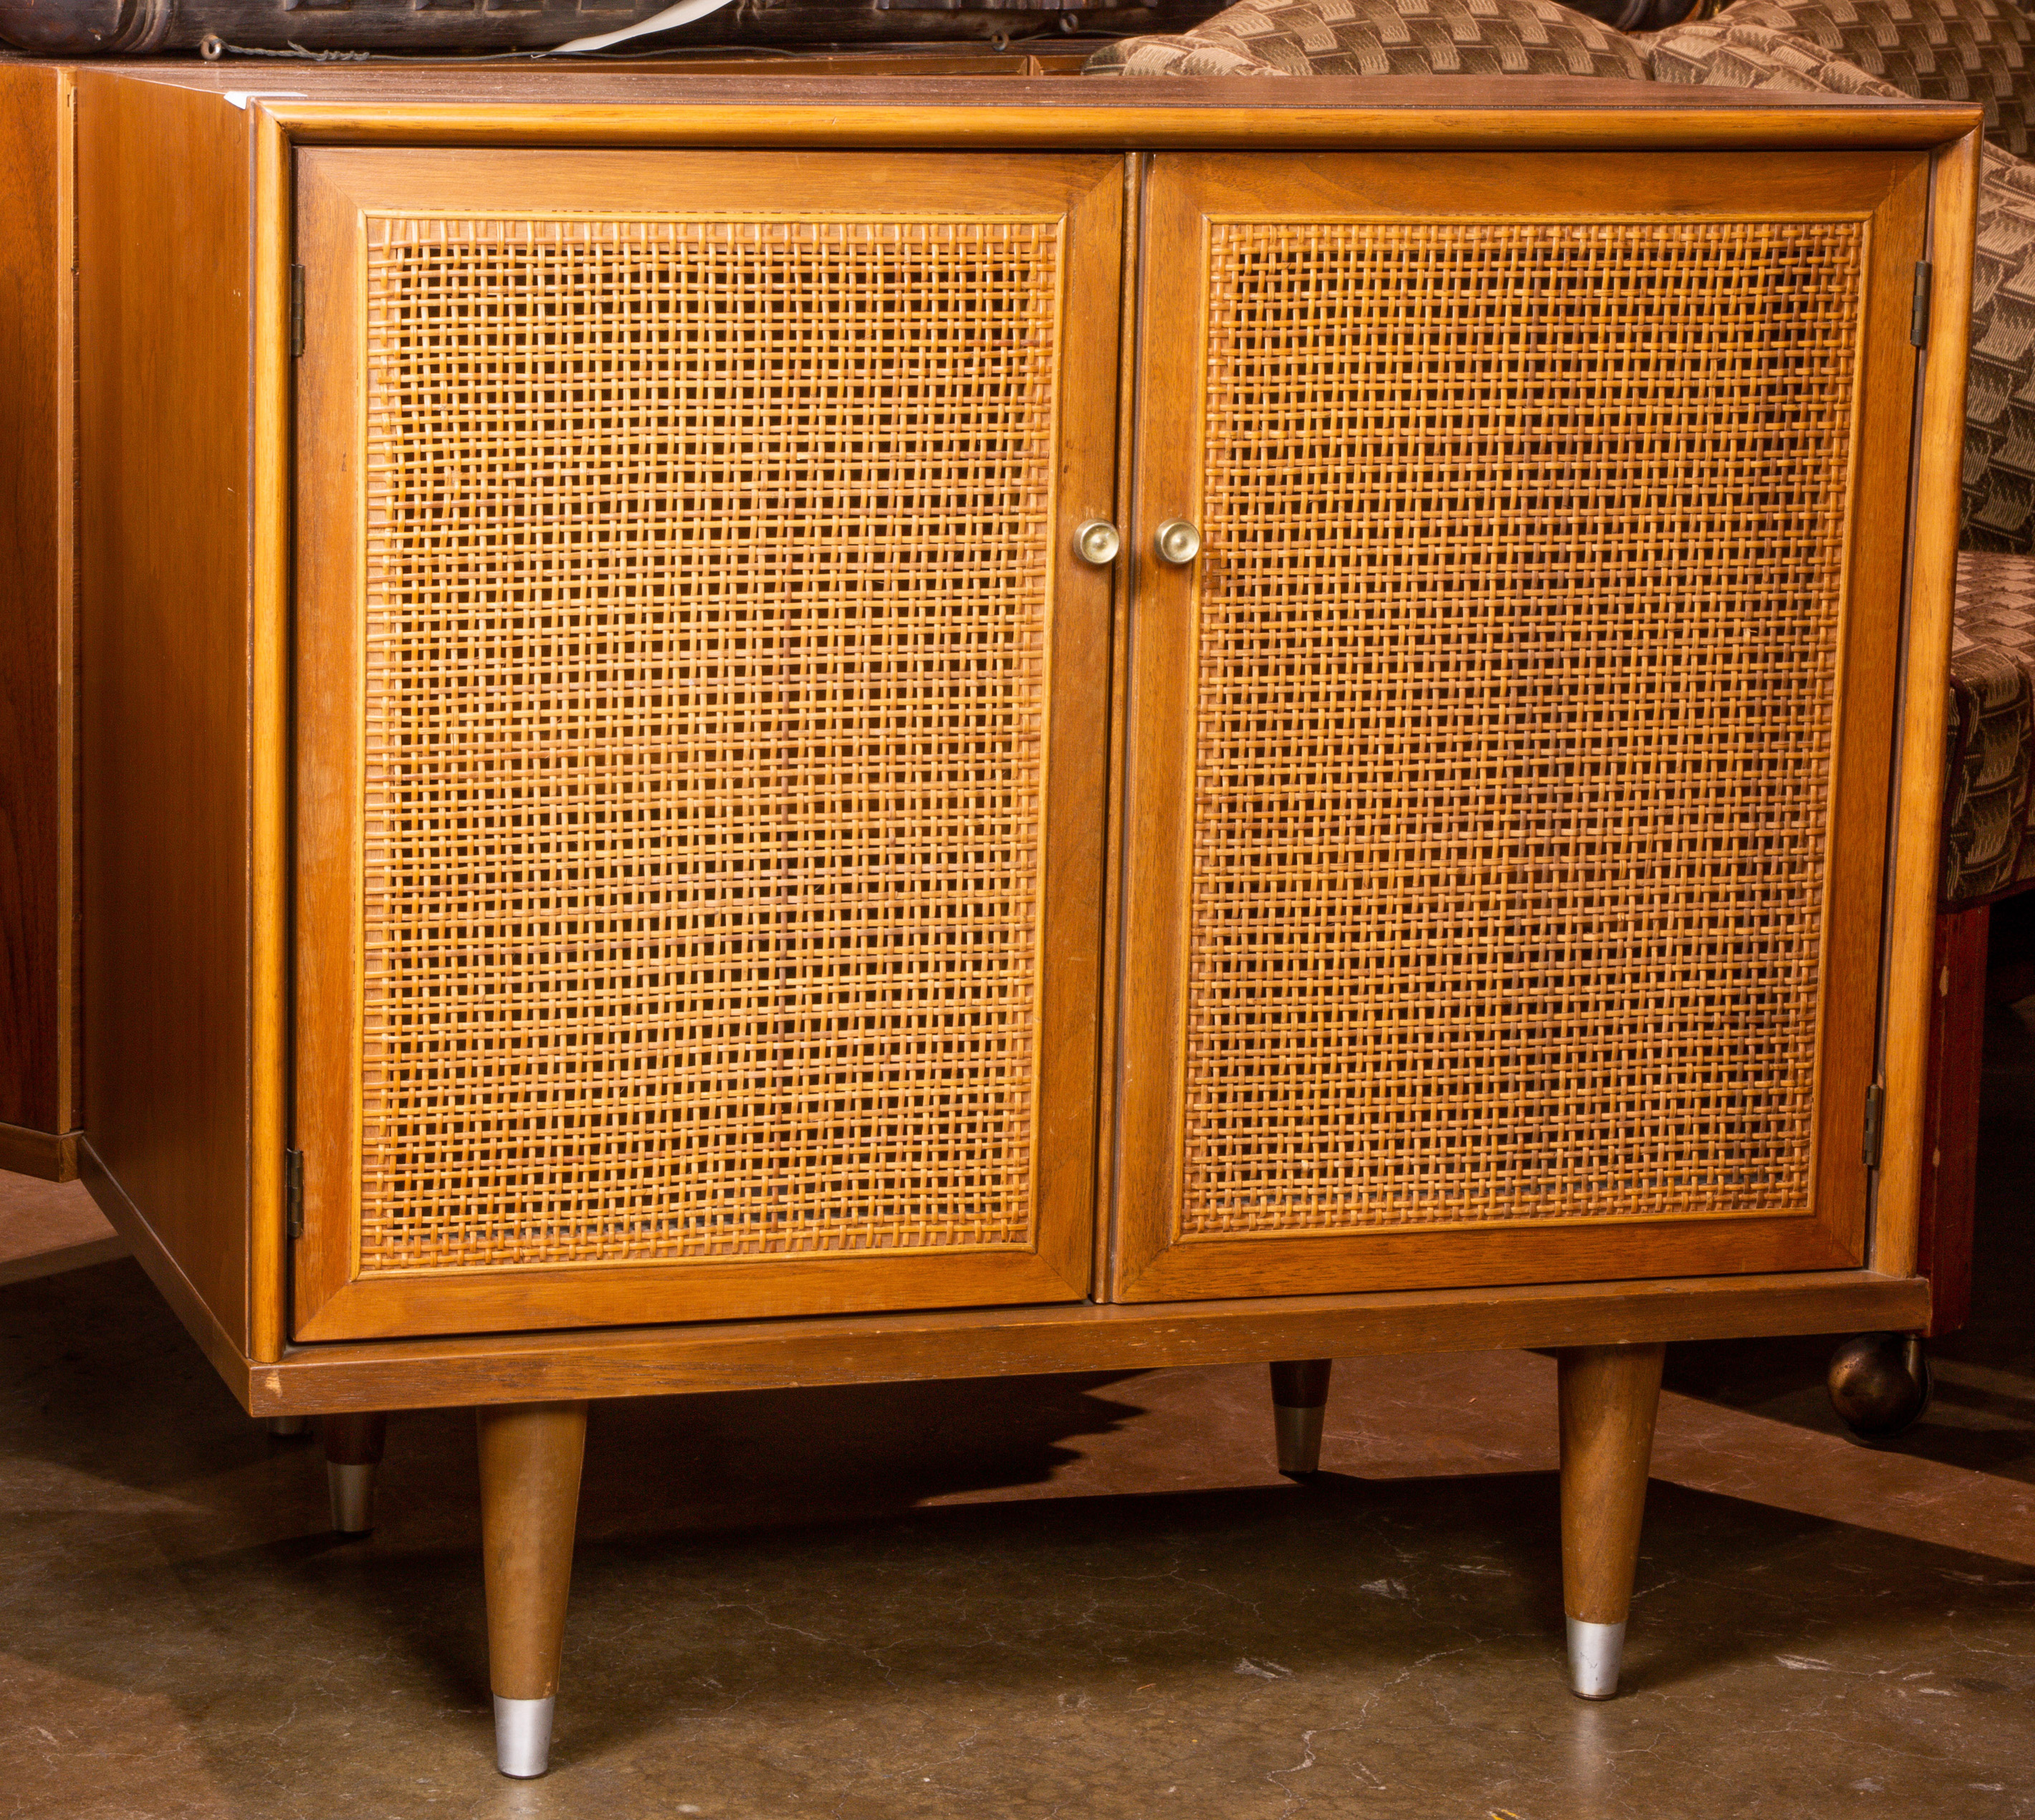 MID CENTURY MODERN CHEST WITH RATTAN 3a43f7